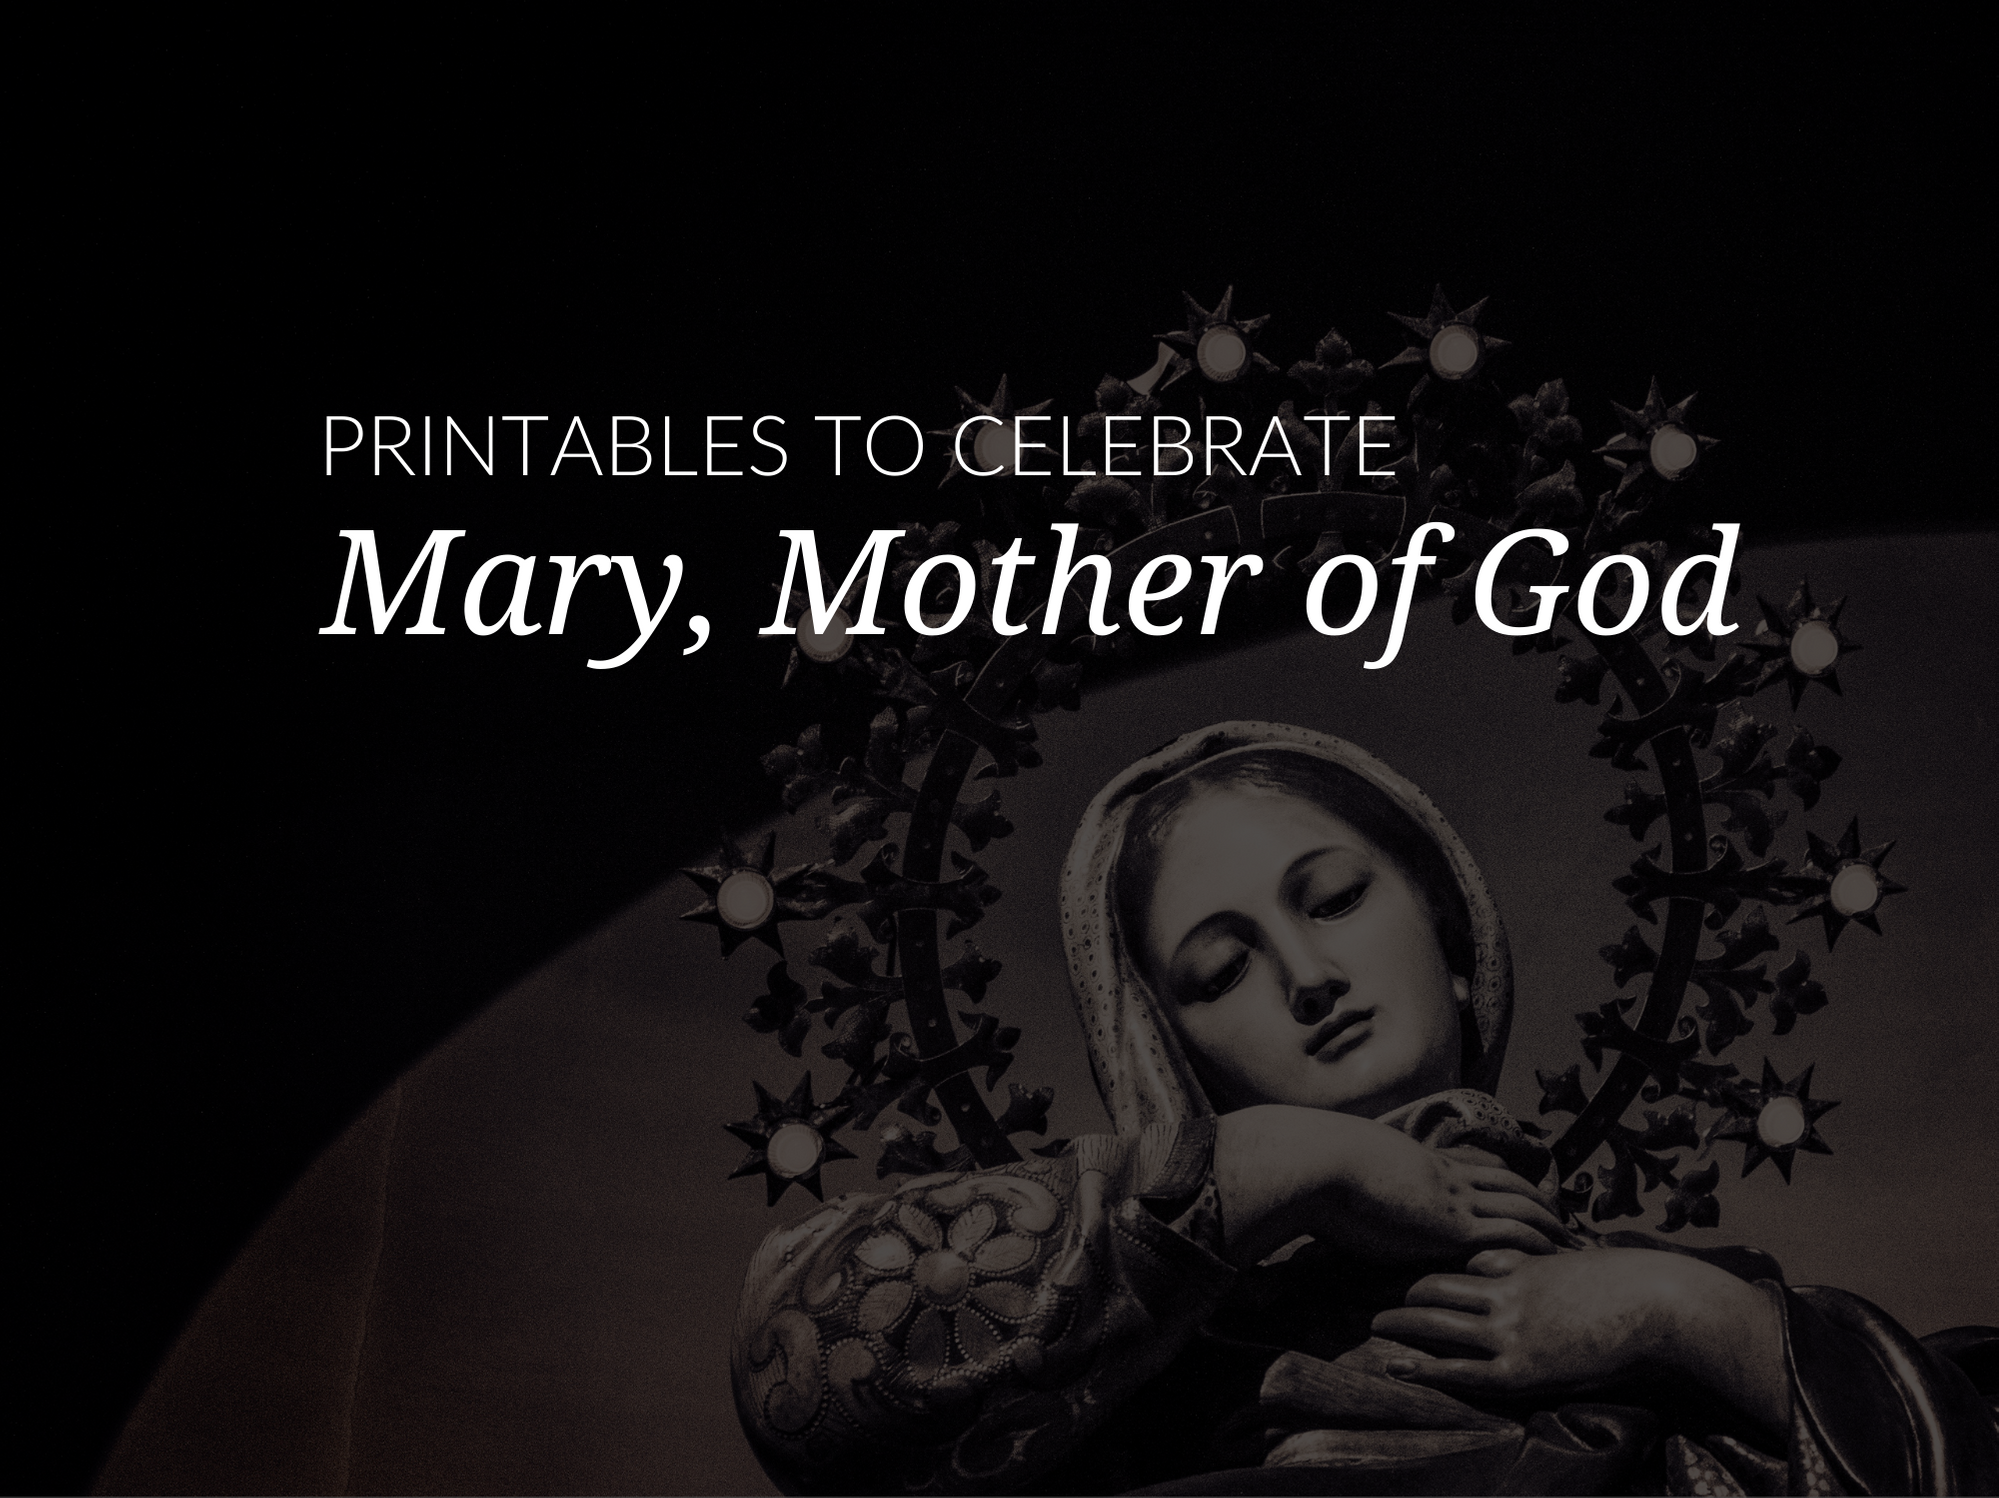 celebrate-mary-mother-of-god-activities-celebrate-mary-during-may-at-home